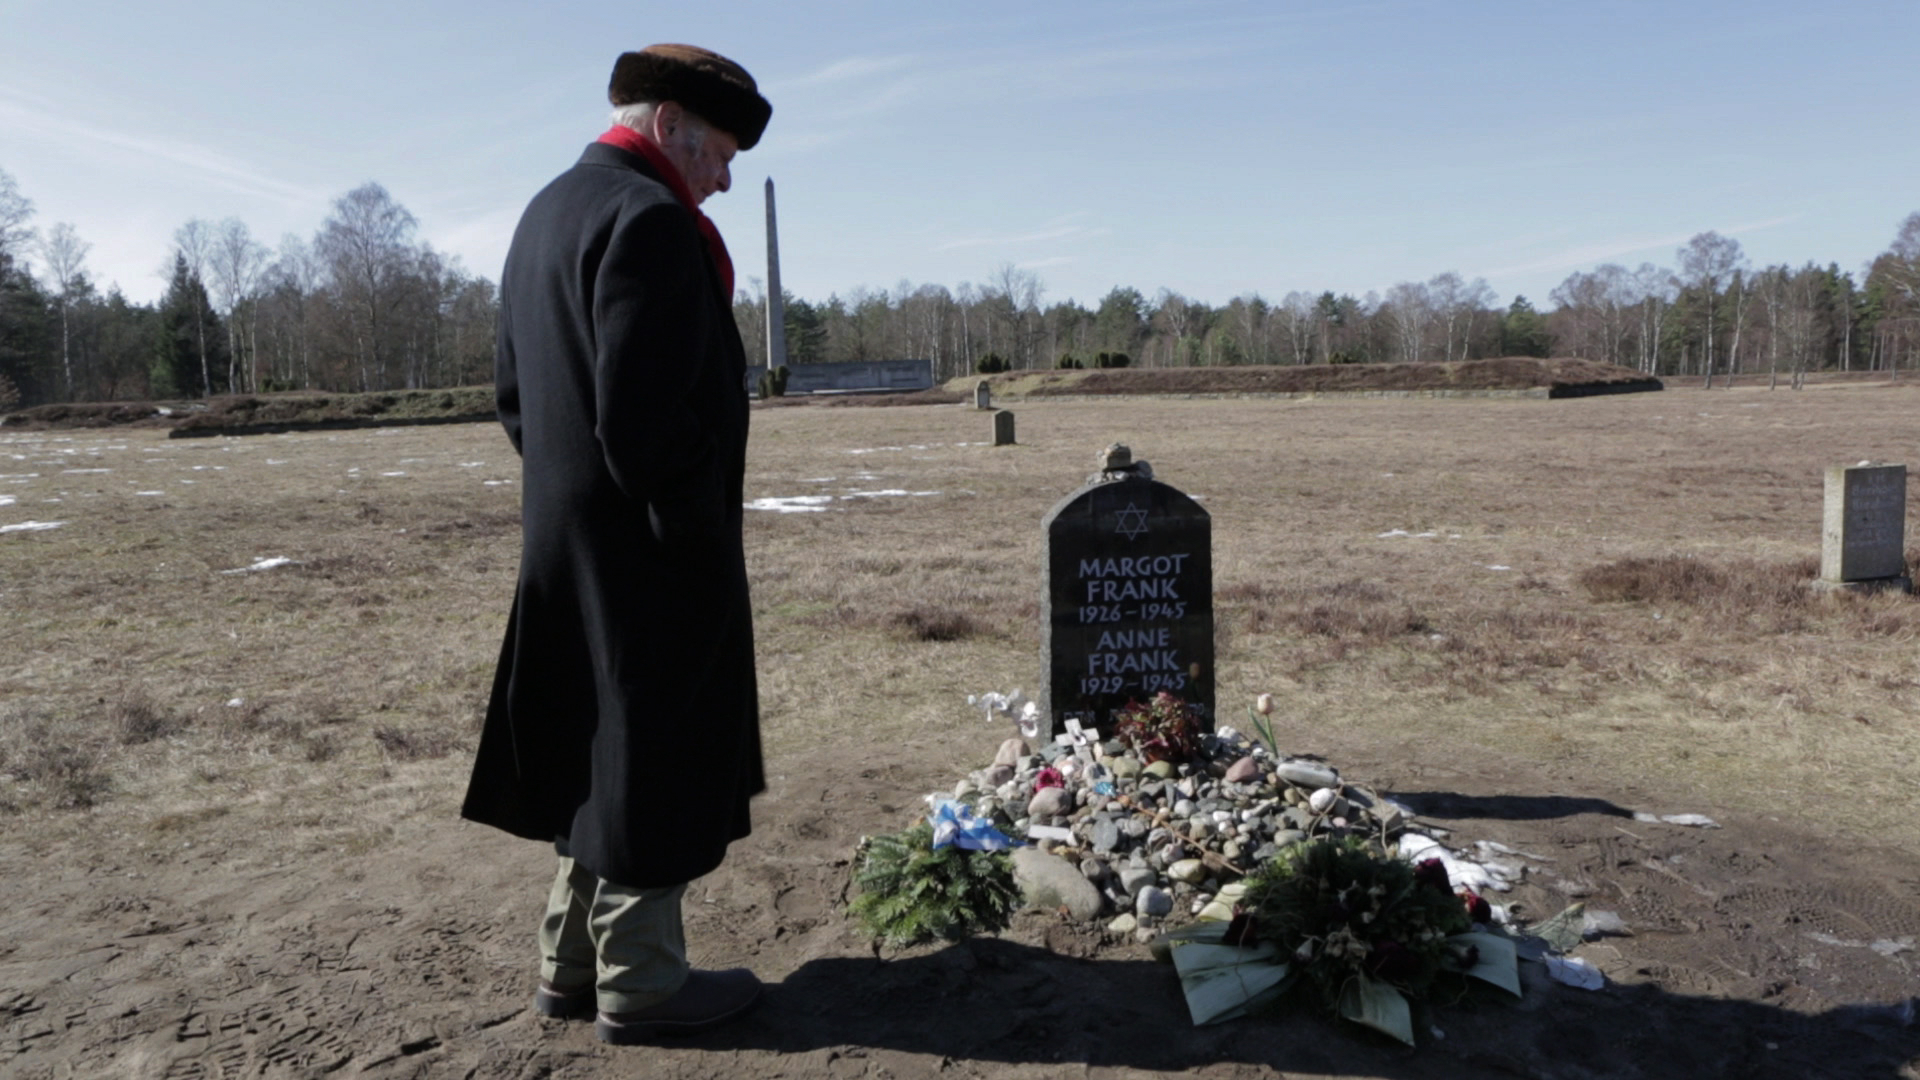 Buddy Elias viisting the memorial grave site of his cousin, Anne Frank at Bergen Belsen Camp.